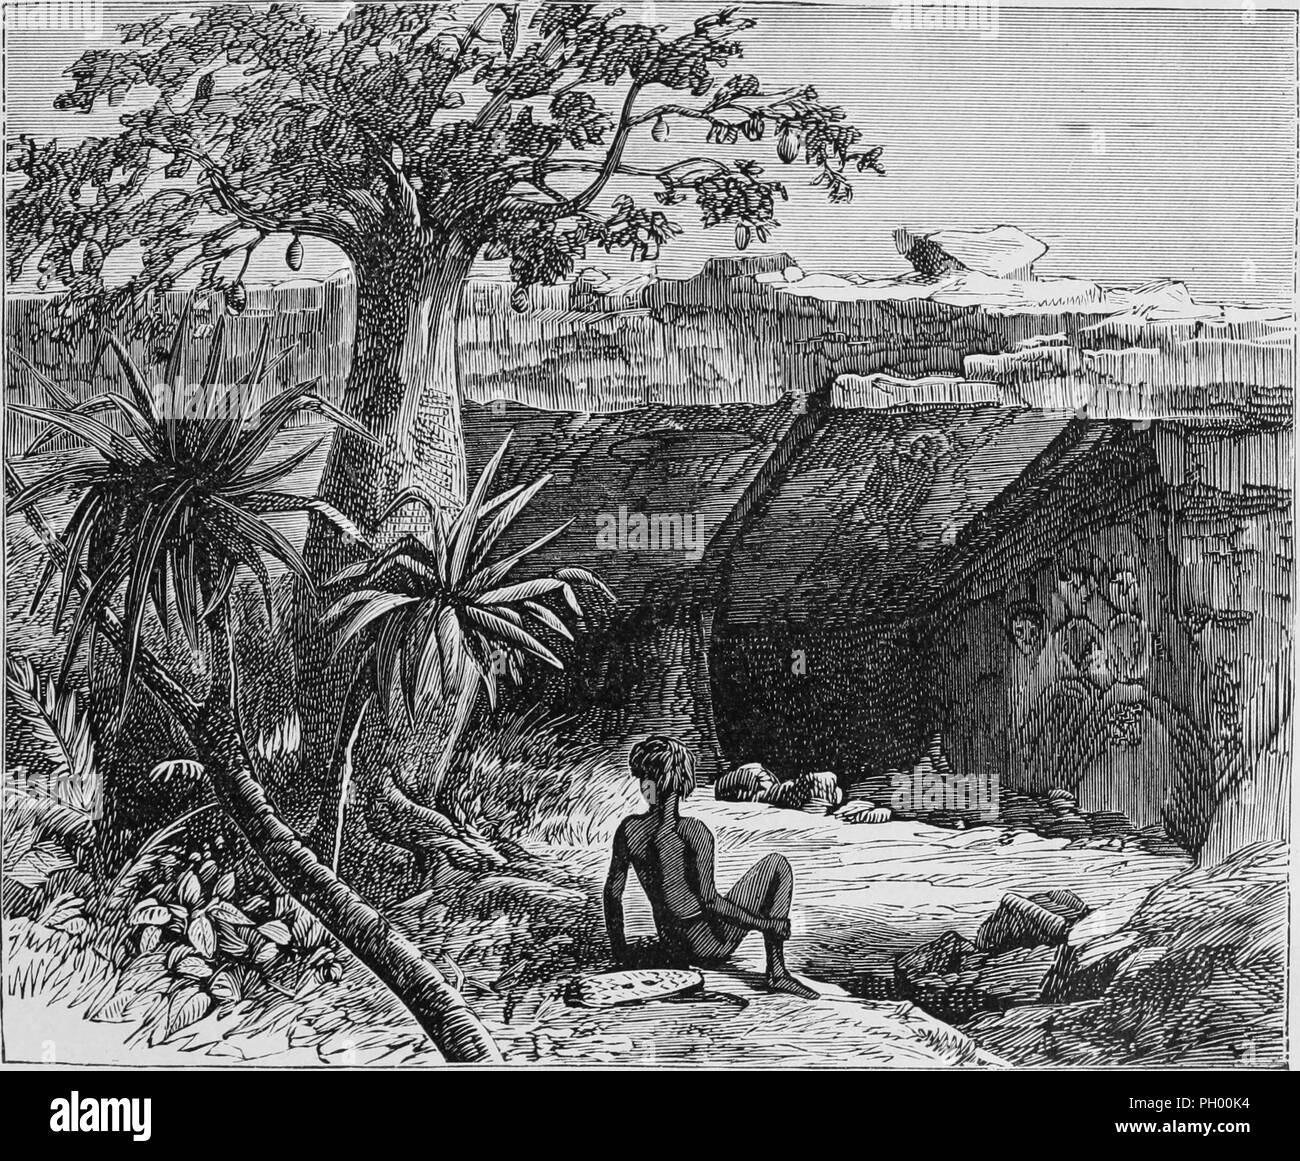 Black and white vintage print, depicting an Aboriginal Australian, seated at the edge of a cliff overlooking the entrance to a cave, with drawings of people and kangaroos visible on the cave walls in the background, located in Australia, published in John George Wood's volume 'The uncivilized races of men in all countries of the world, being a comprehensive account of their manners and customs, and of their physical, social, mental, moral and religious characteristics', 1877. Courtesy Internet Archive. () Stock Photo